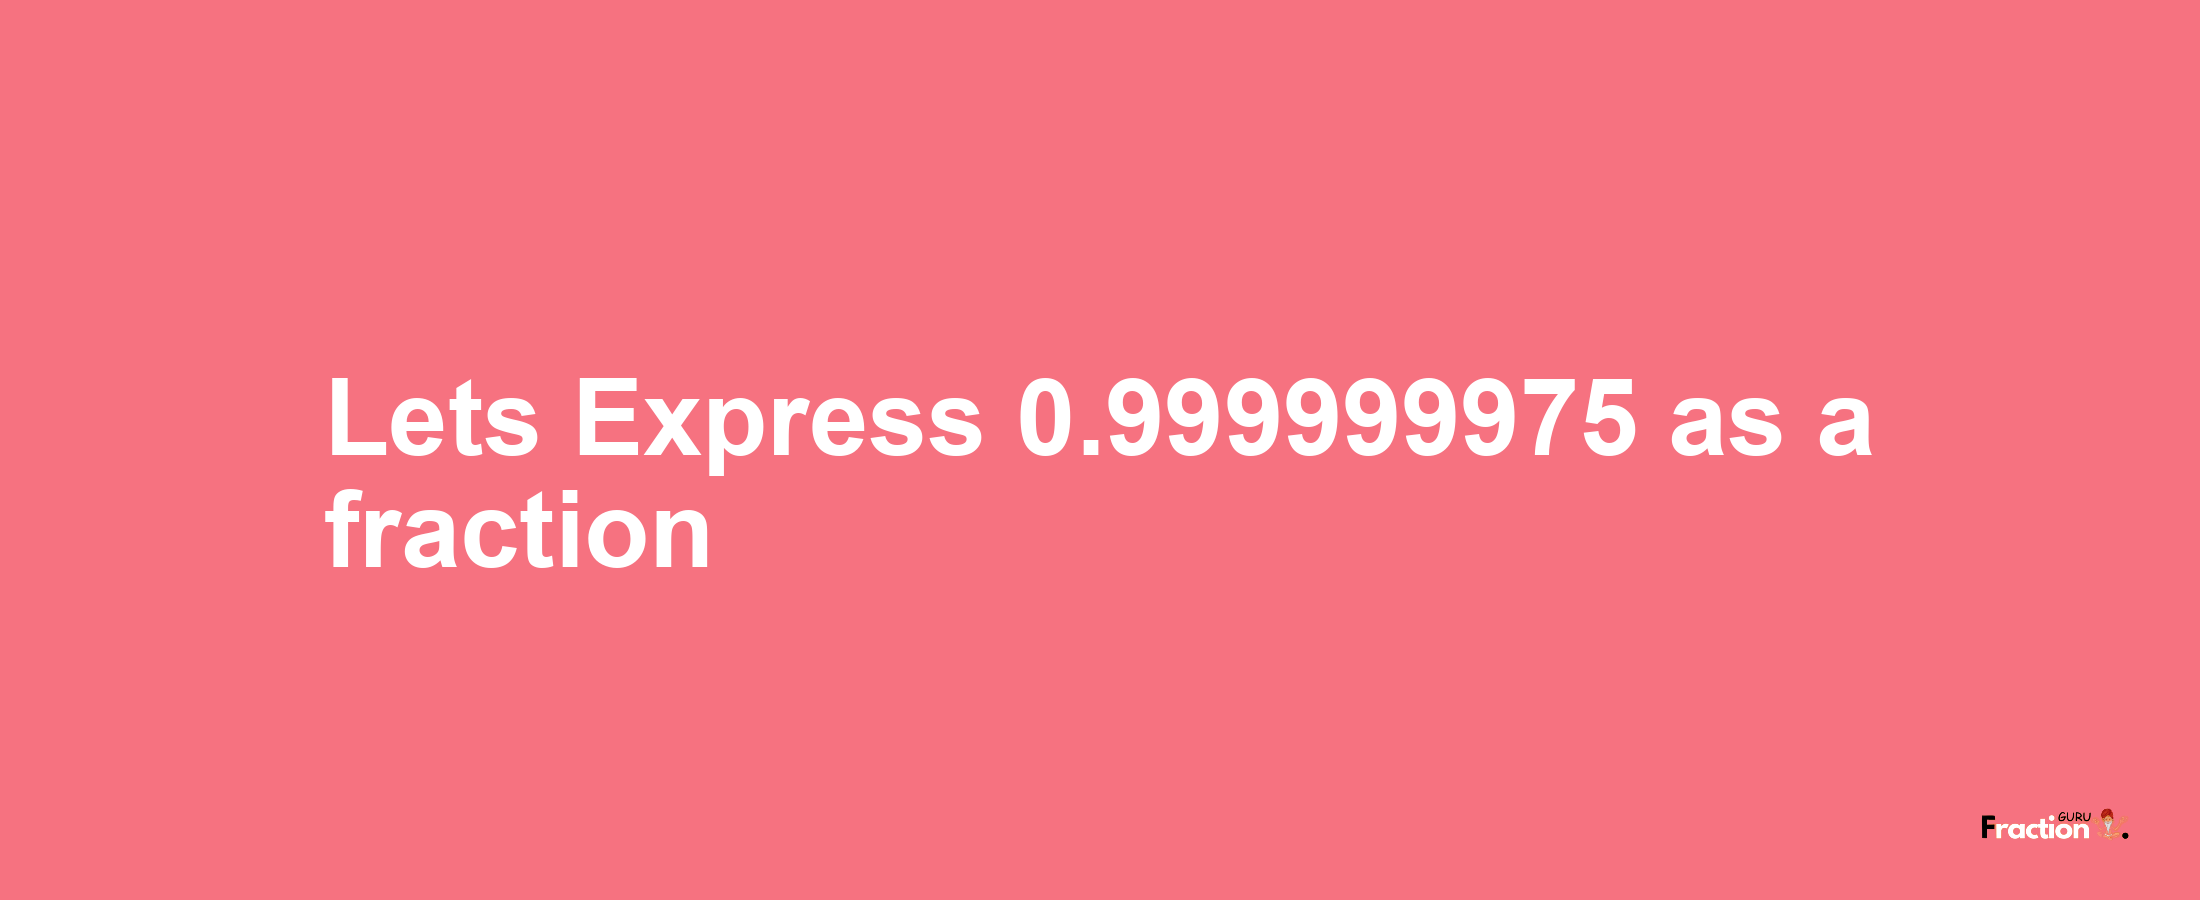 Lets Express 0.999999975 as afraction